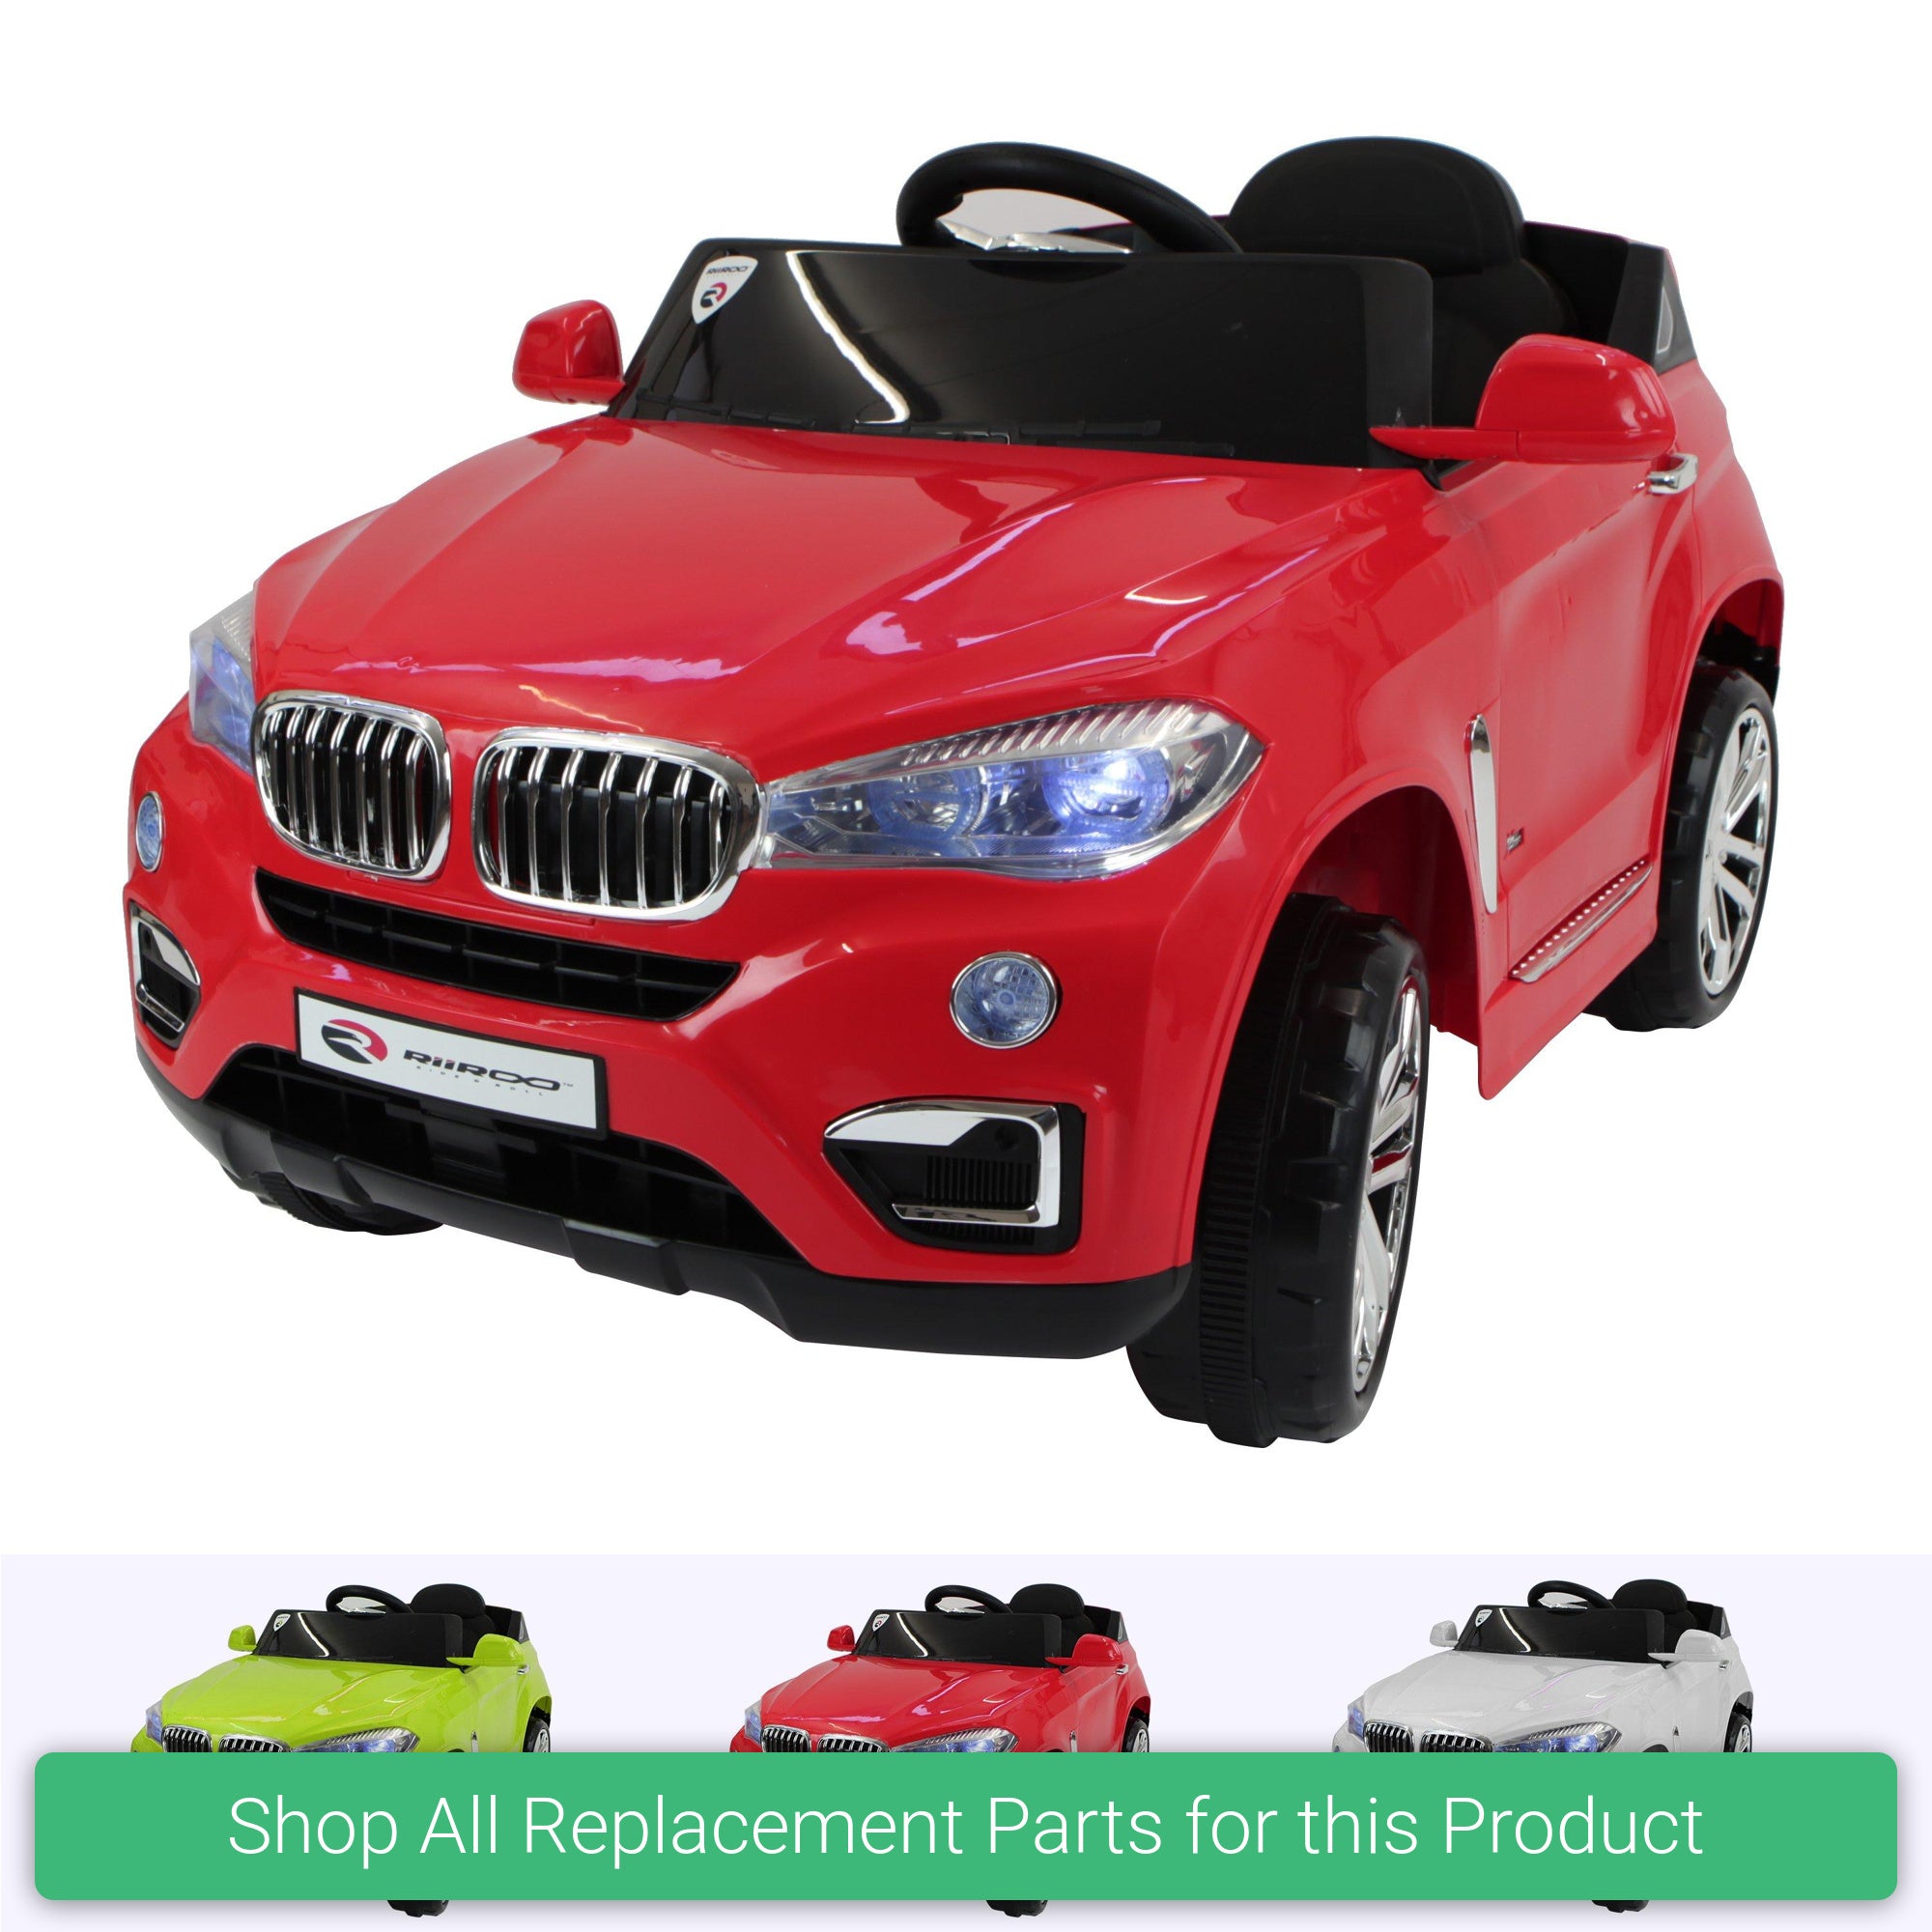 Replacement Parts and Spares for Kids Bmw Jeep Looking - BMW-X50-2016 - KL5188A